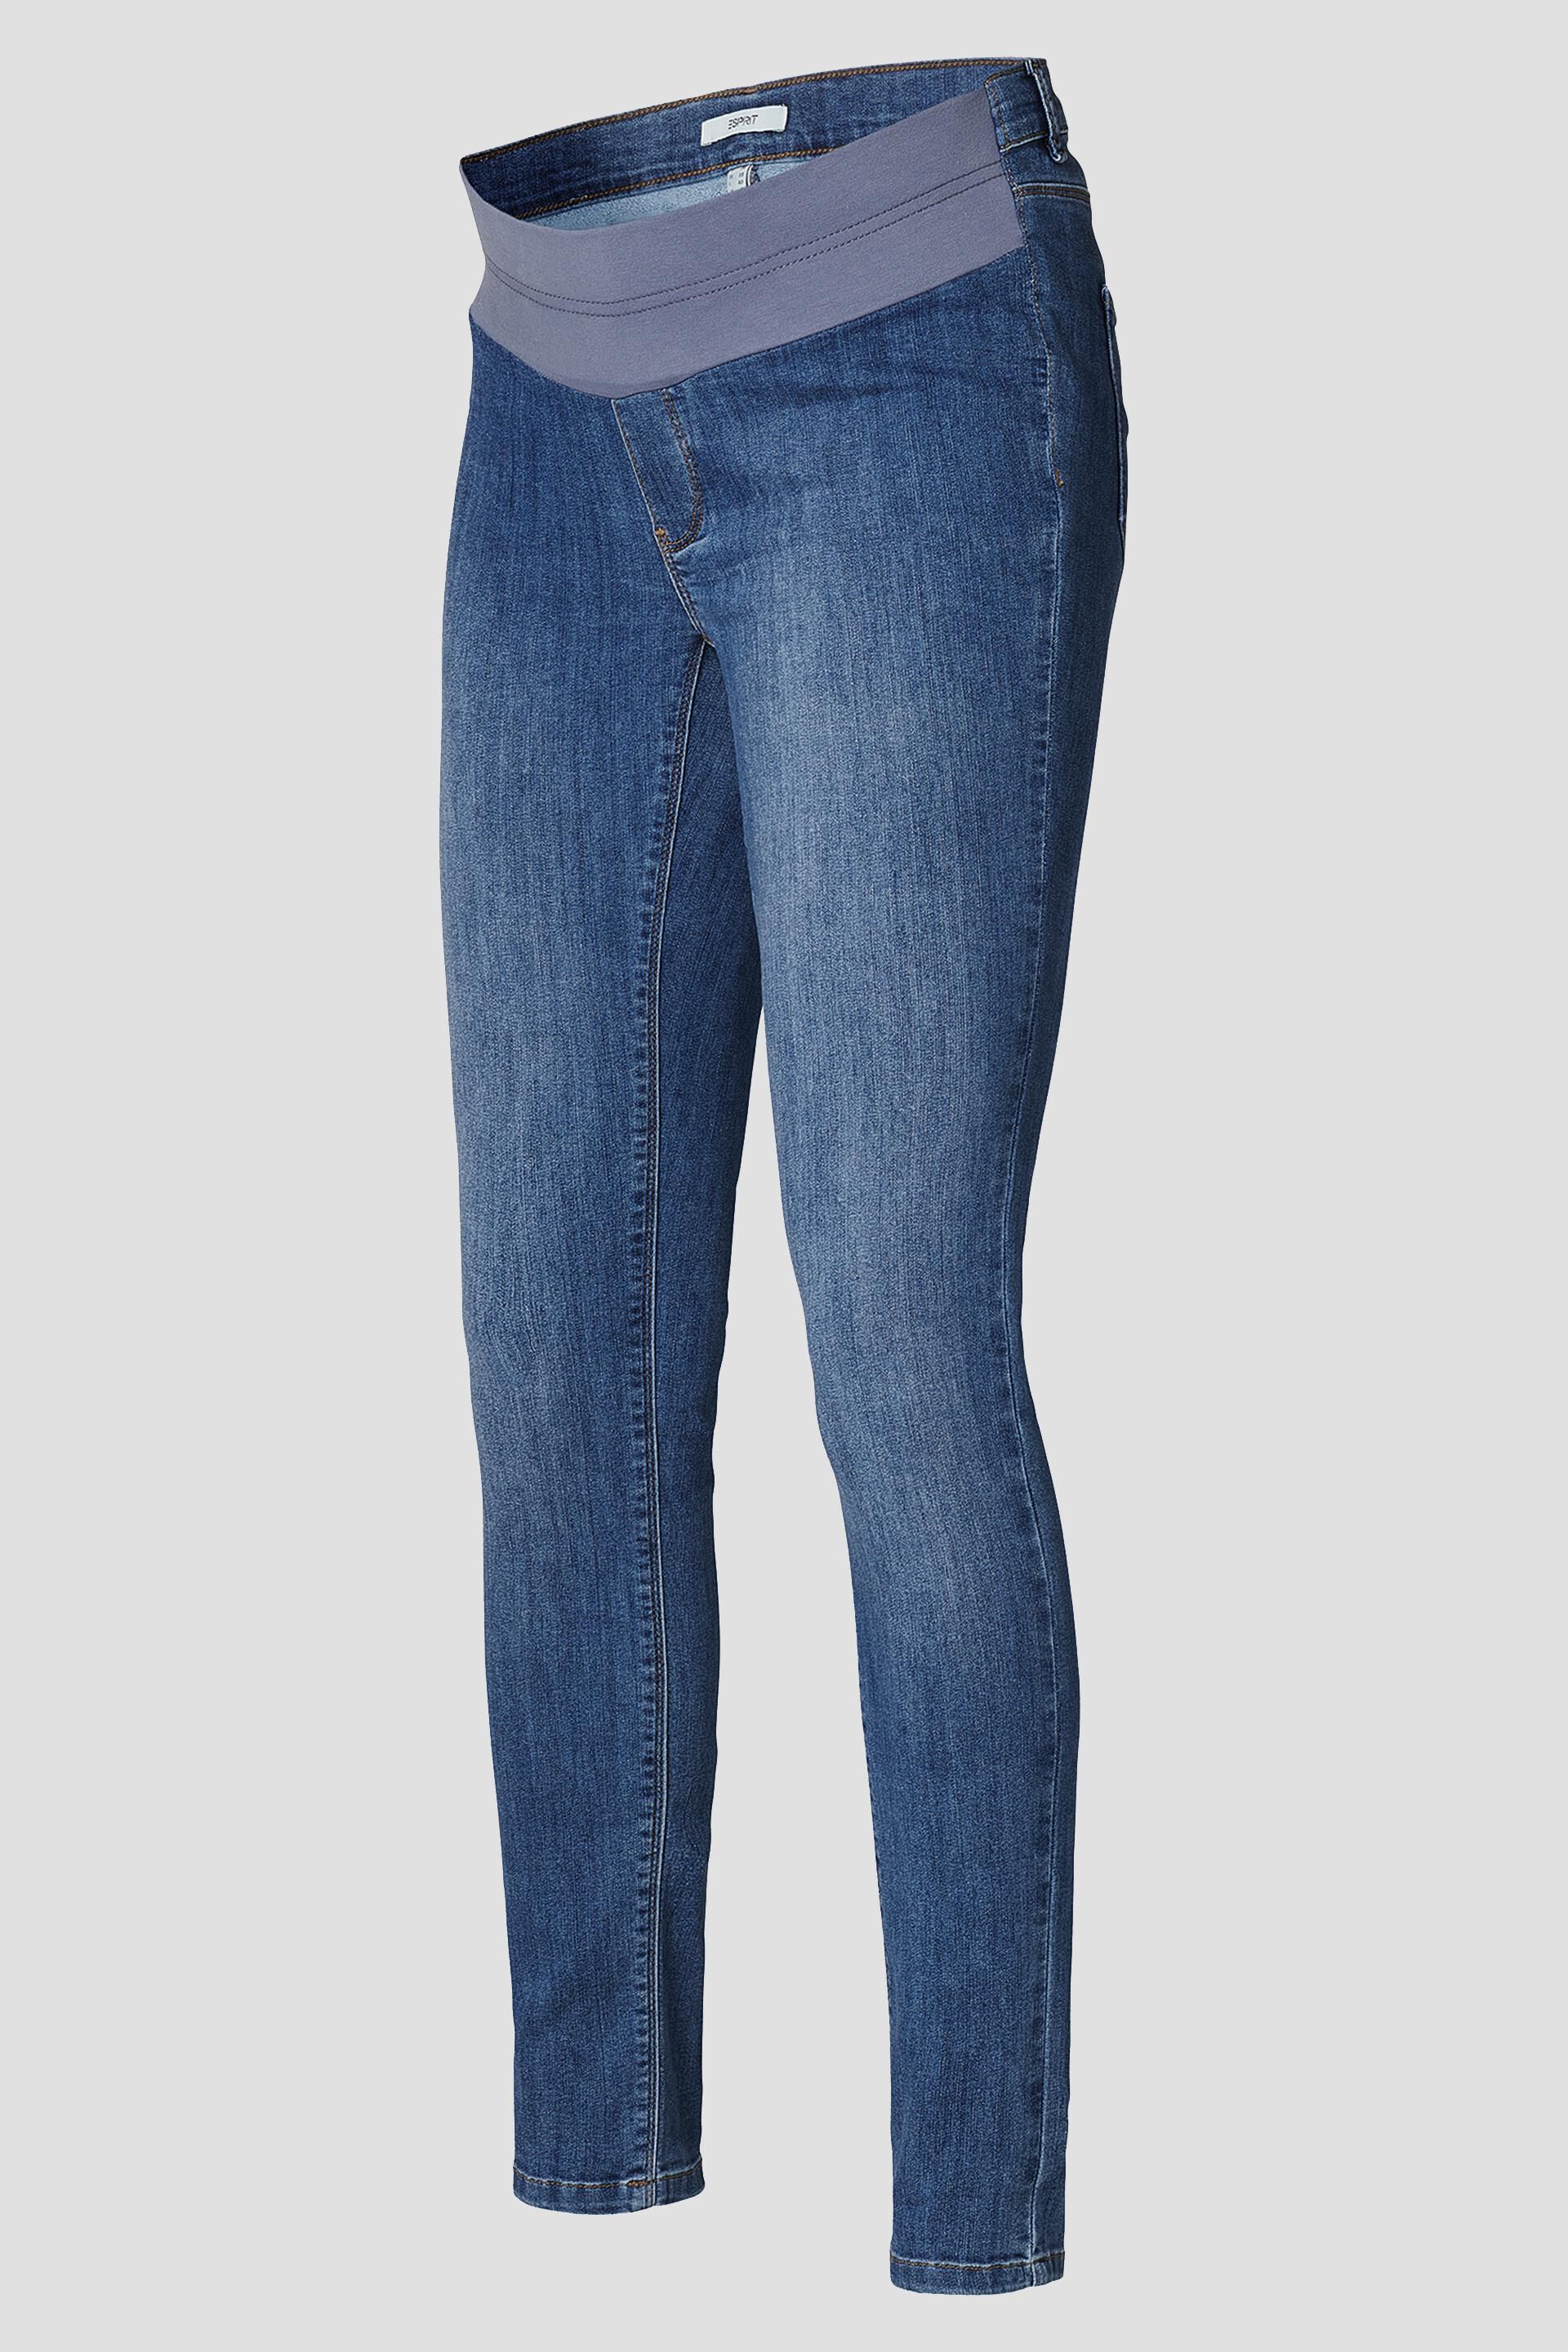 Esprit jeggings an waistband Stretch with under-bump